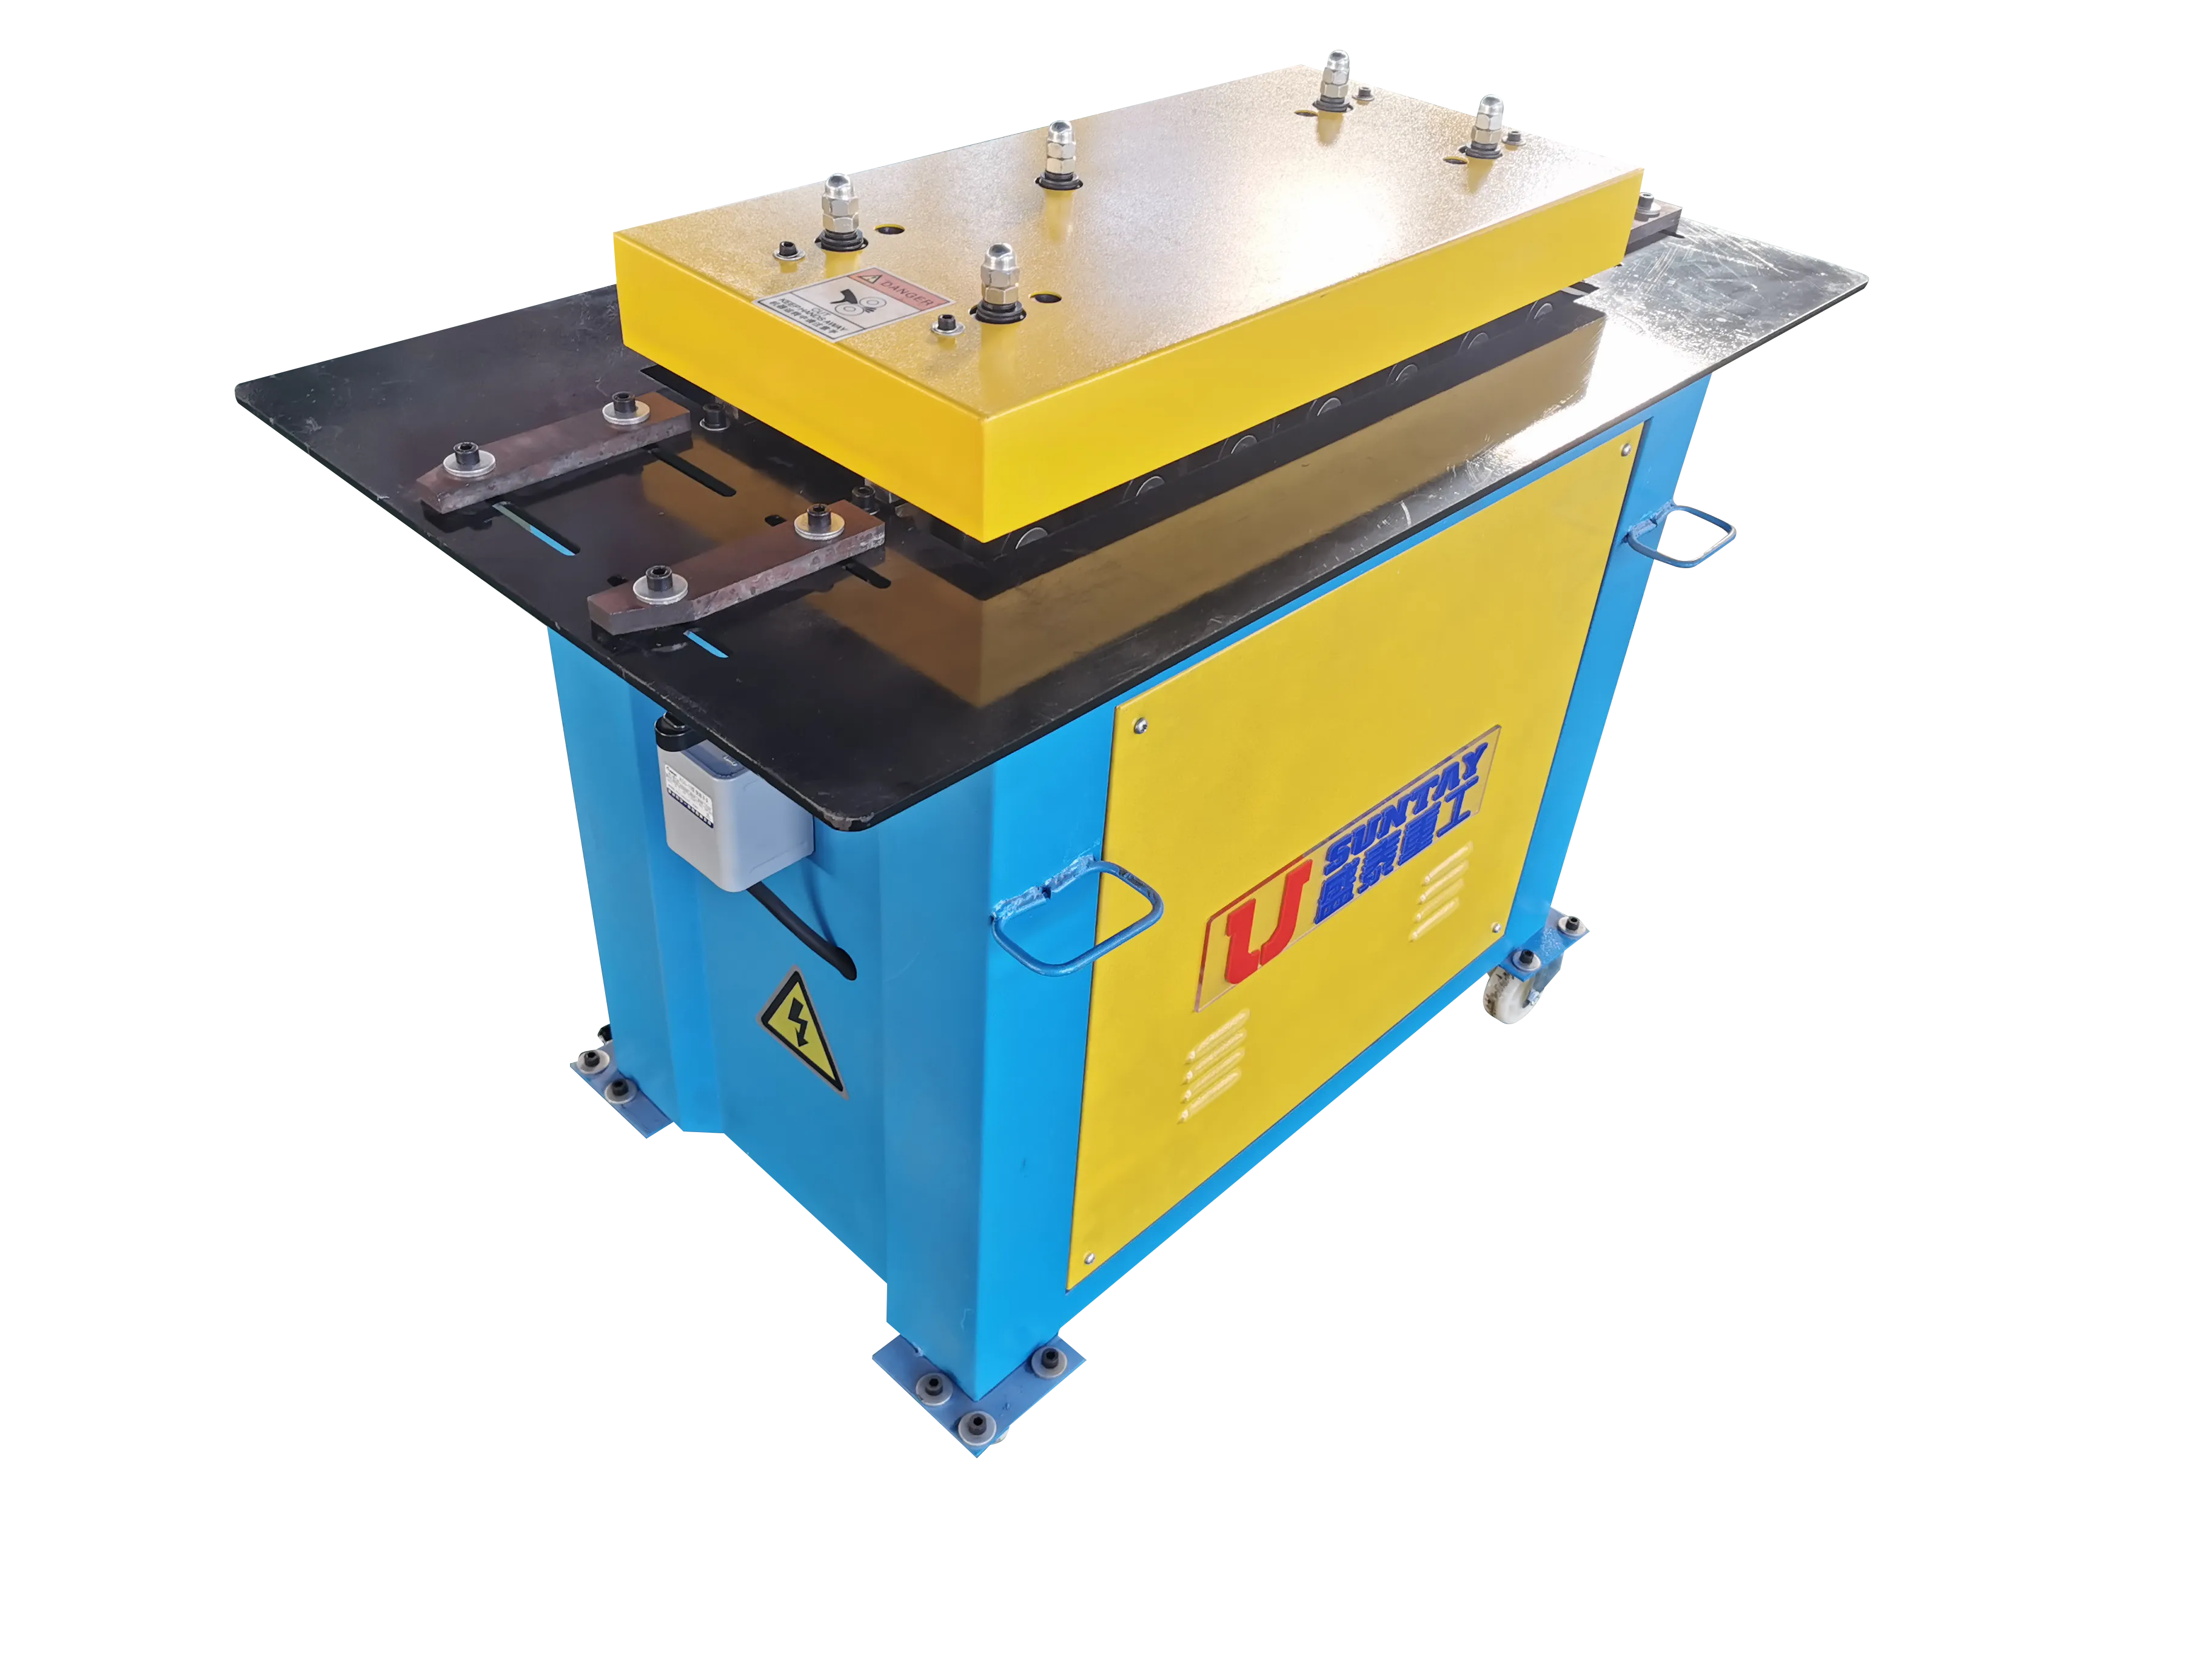 Detailed information on Air Duct Bite Machine, take a look